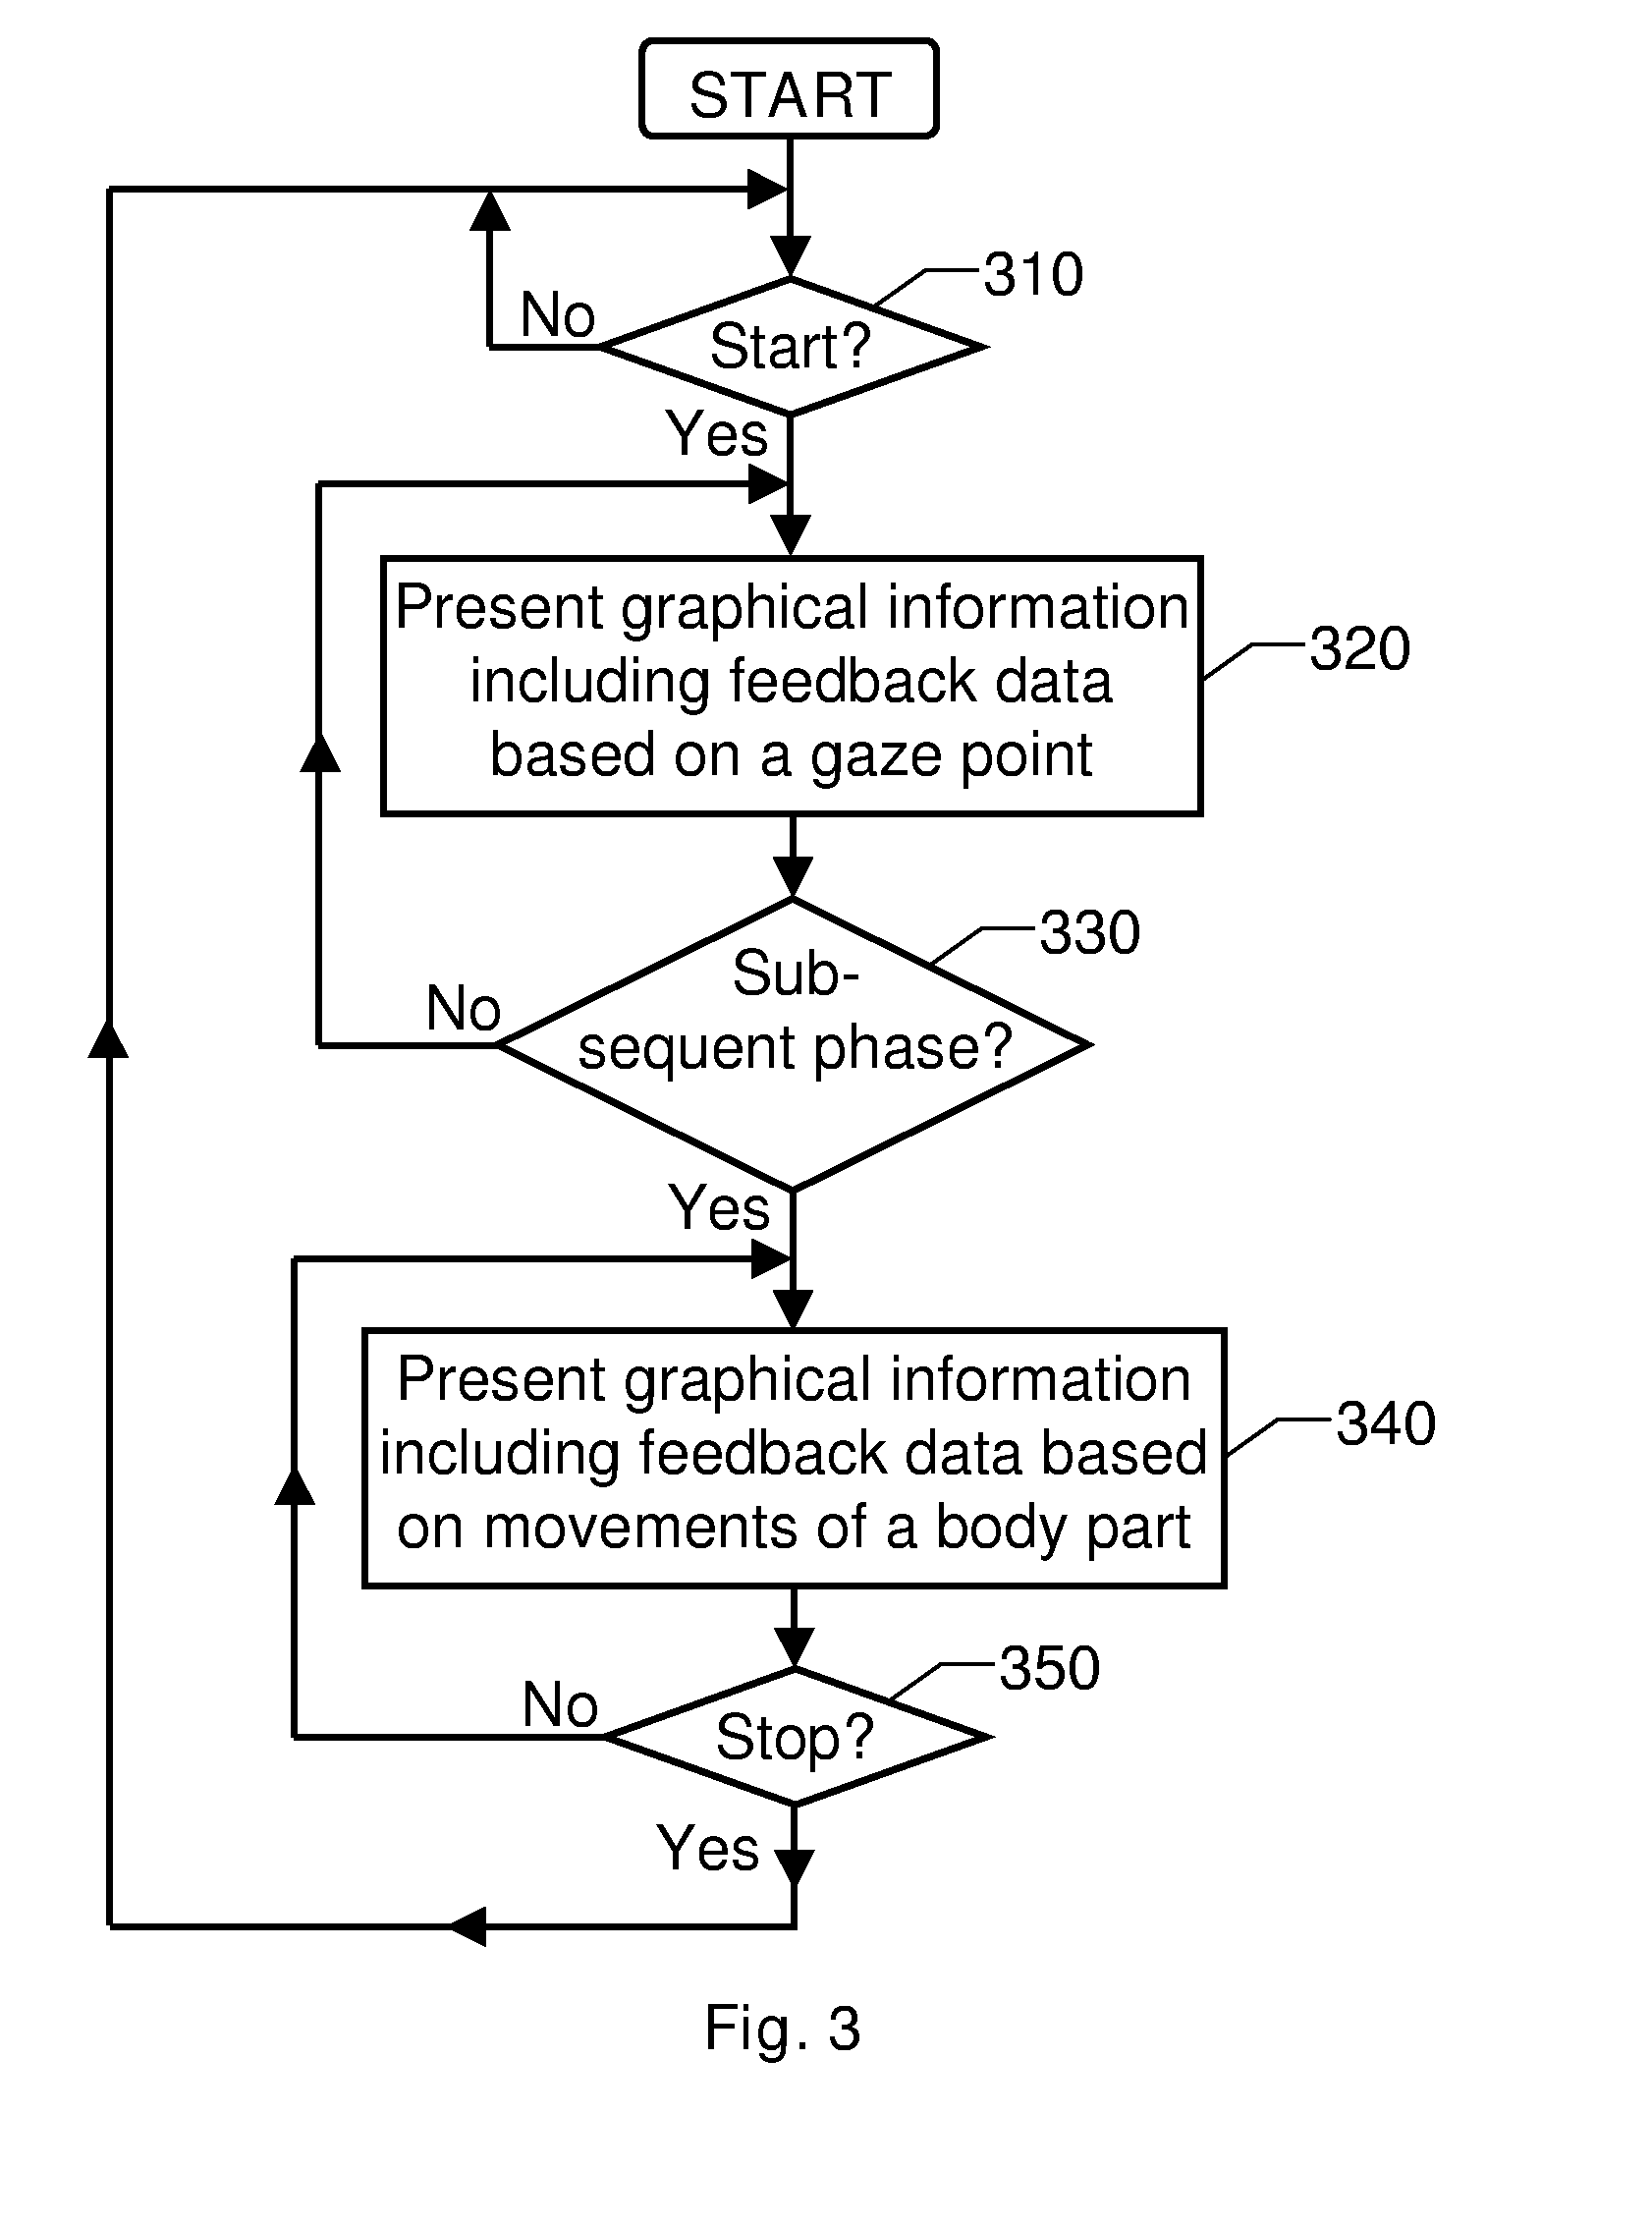 Generation of graphical feedback in a computer system